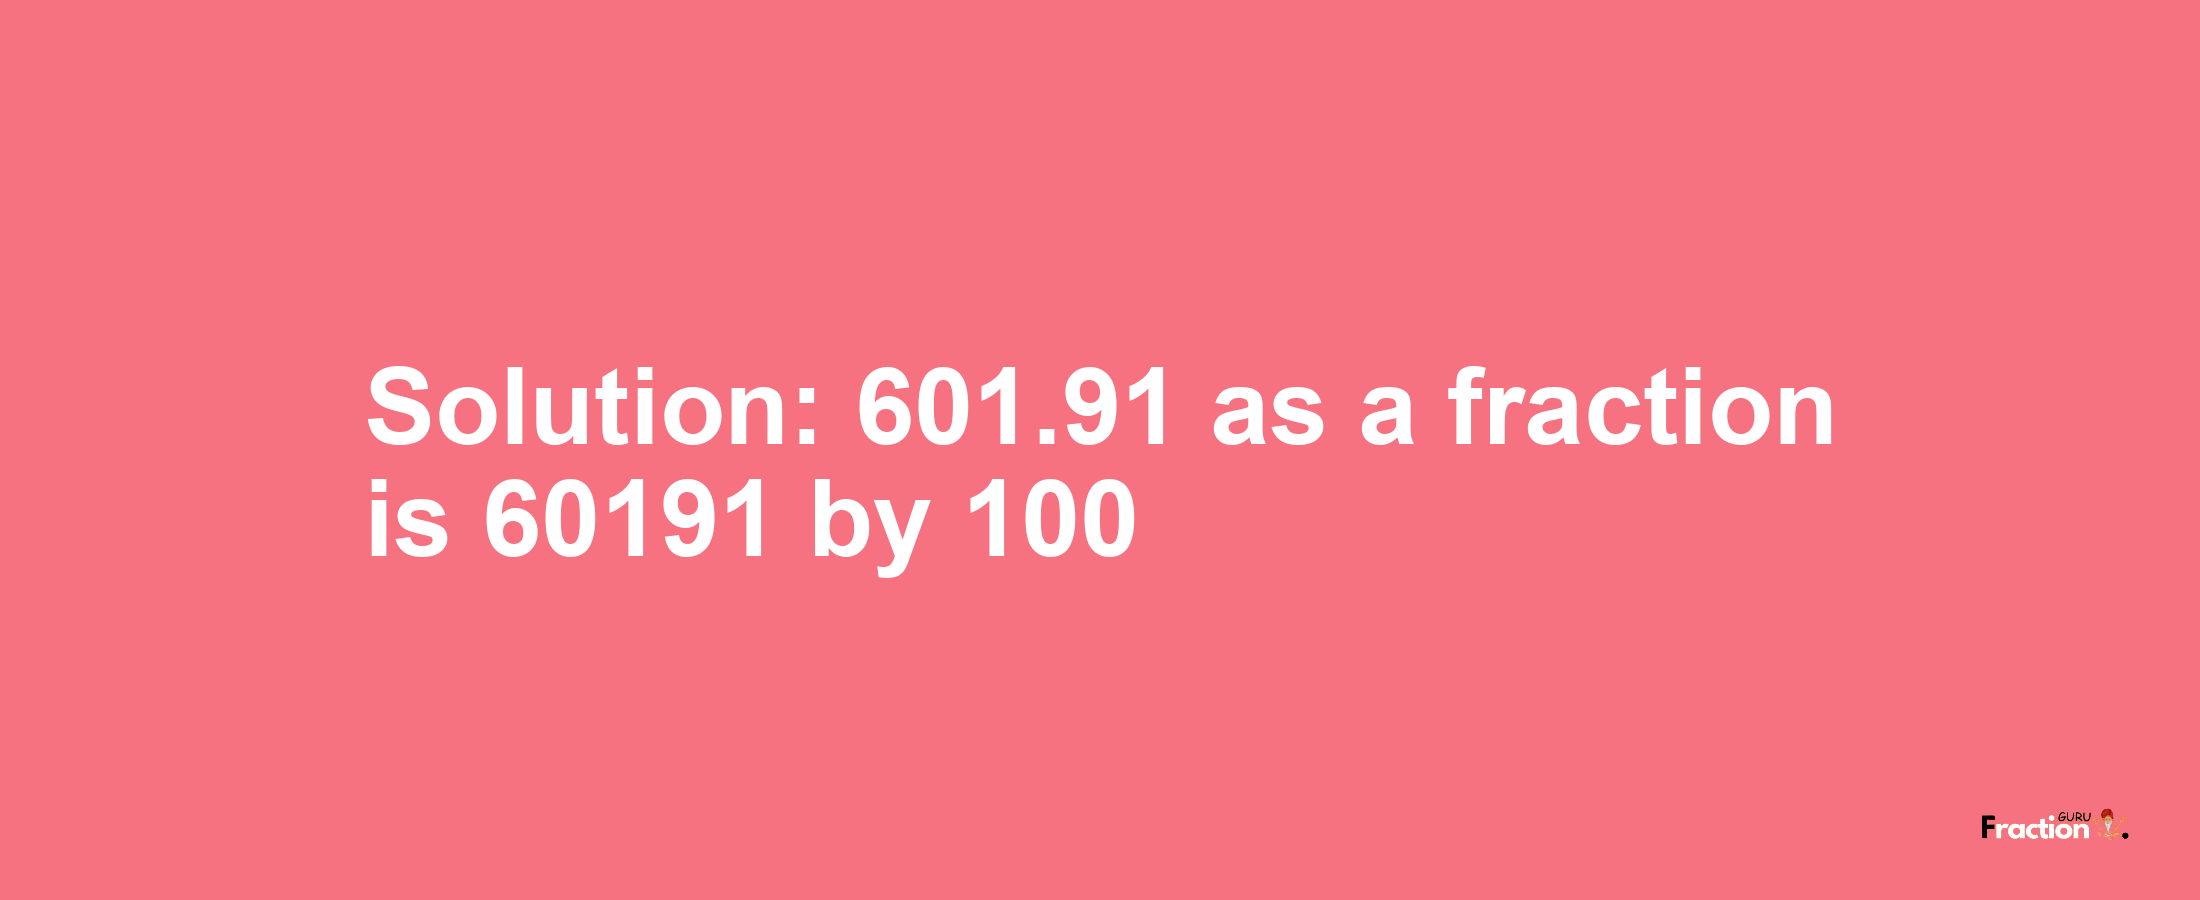 Solution:601.91 as a fraction is 60191/100